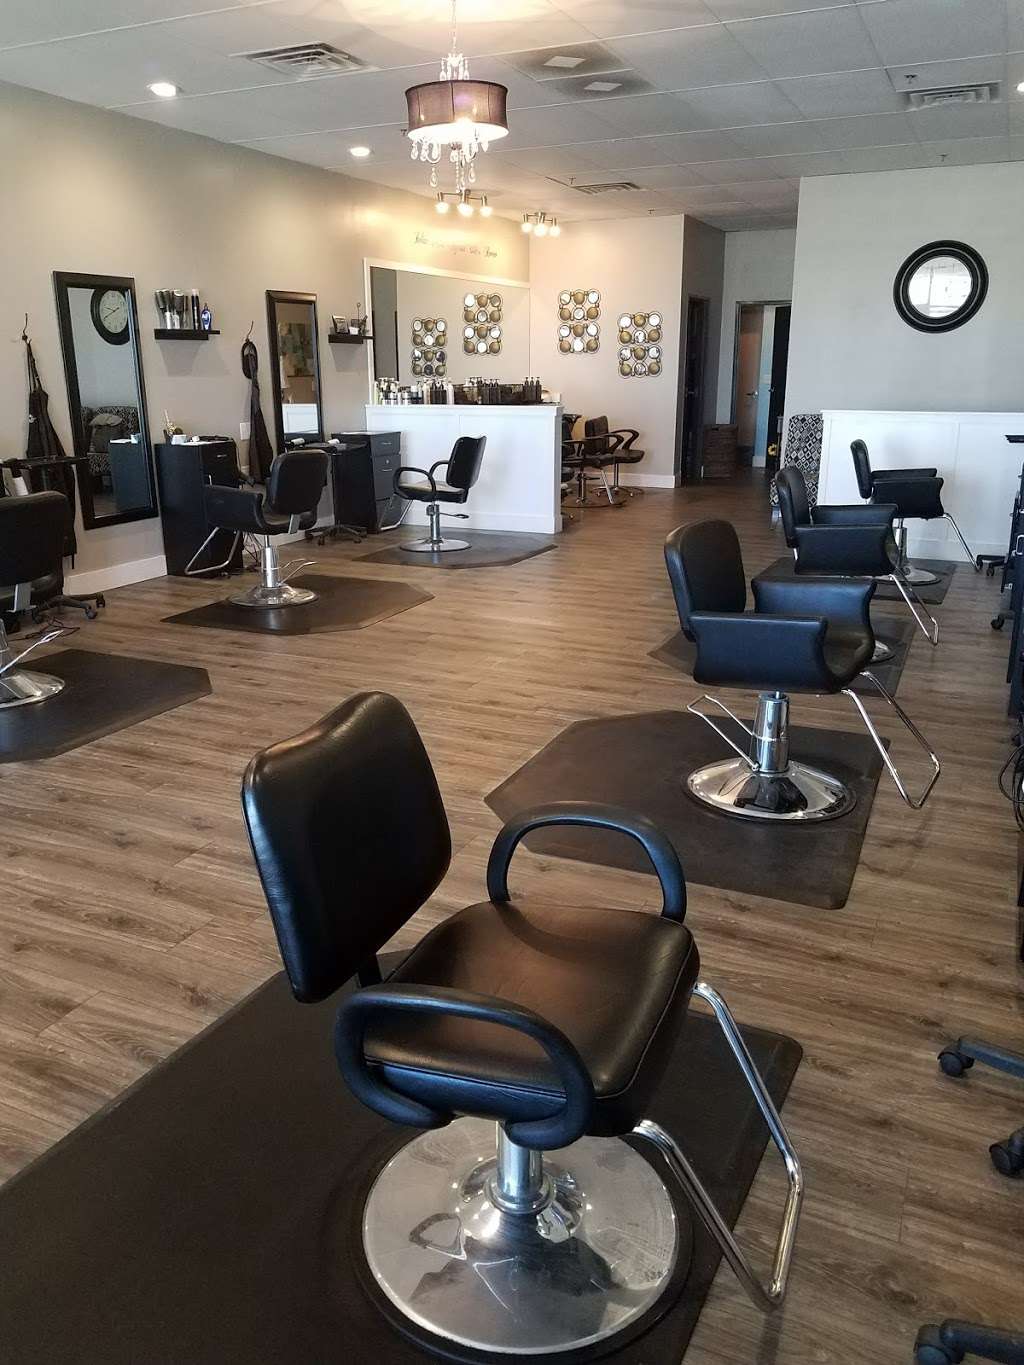 Simply Beauty Hair Designs | 3800 W 144th Ave, Broomfield, CO 80020 | Phone: (720) 872-6232